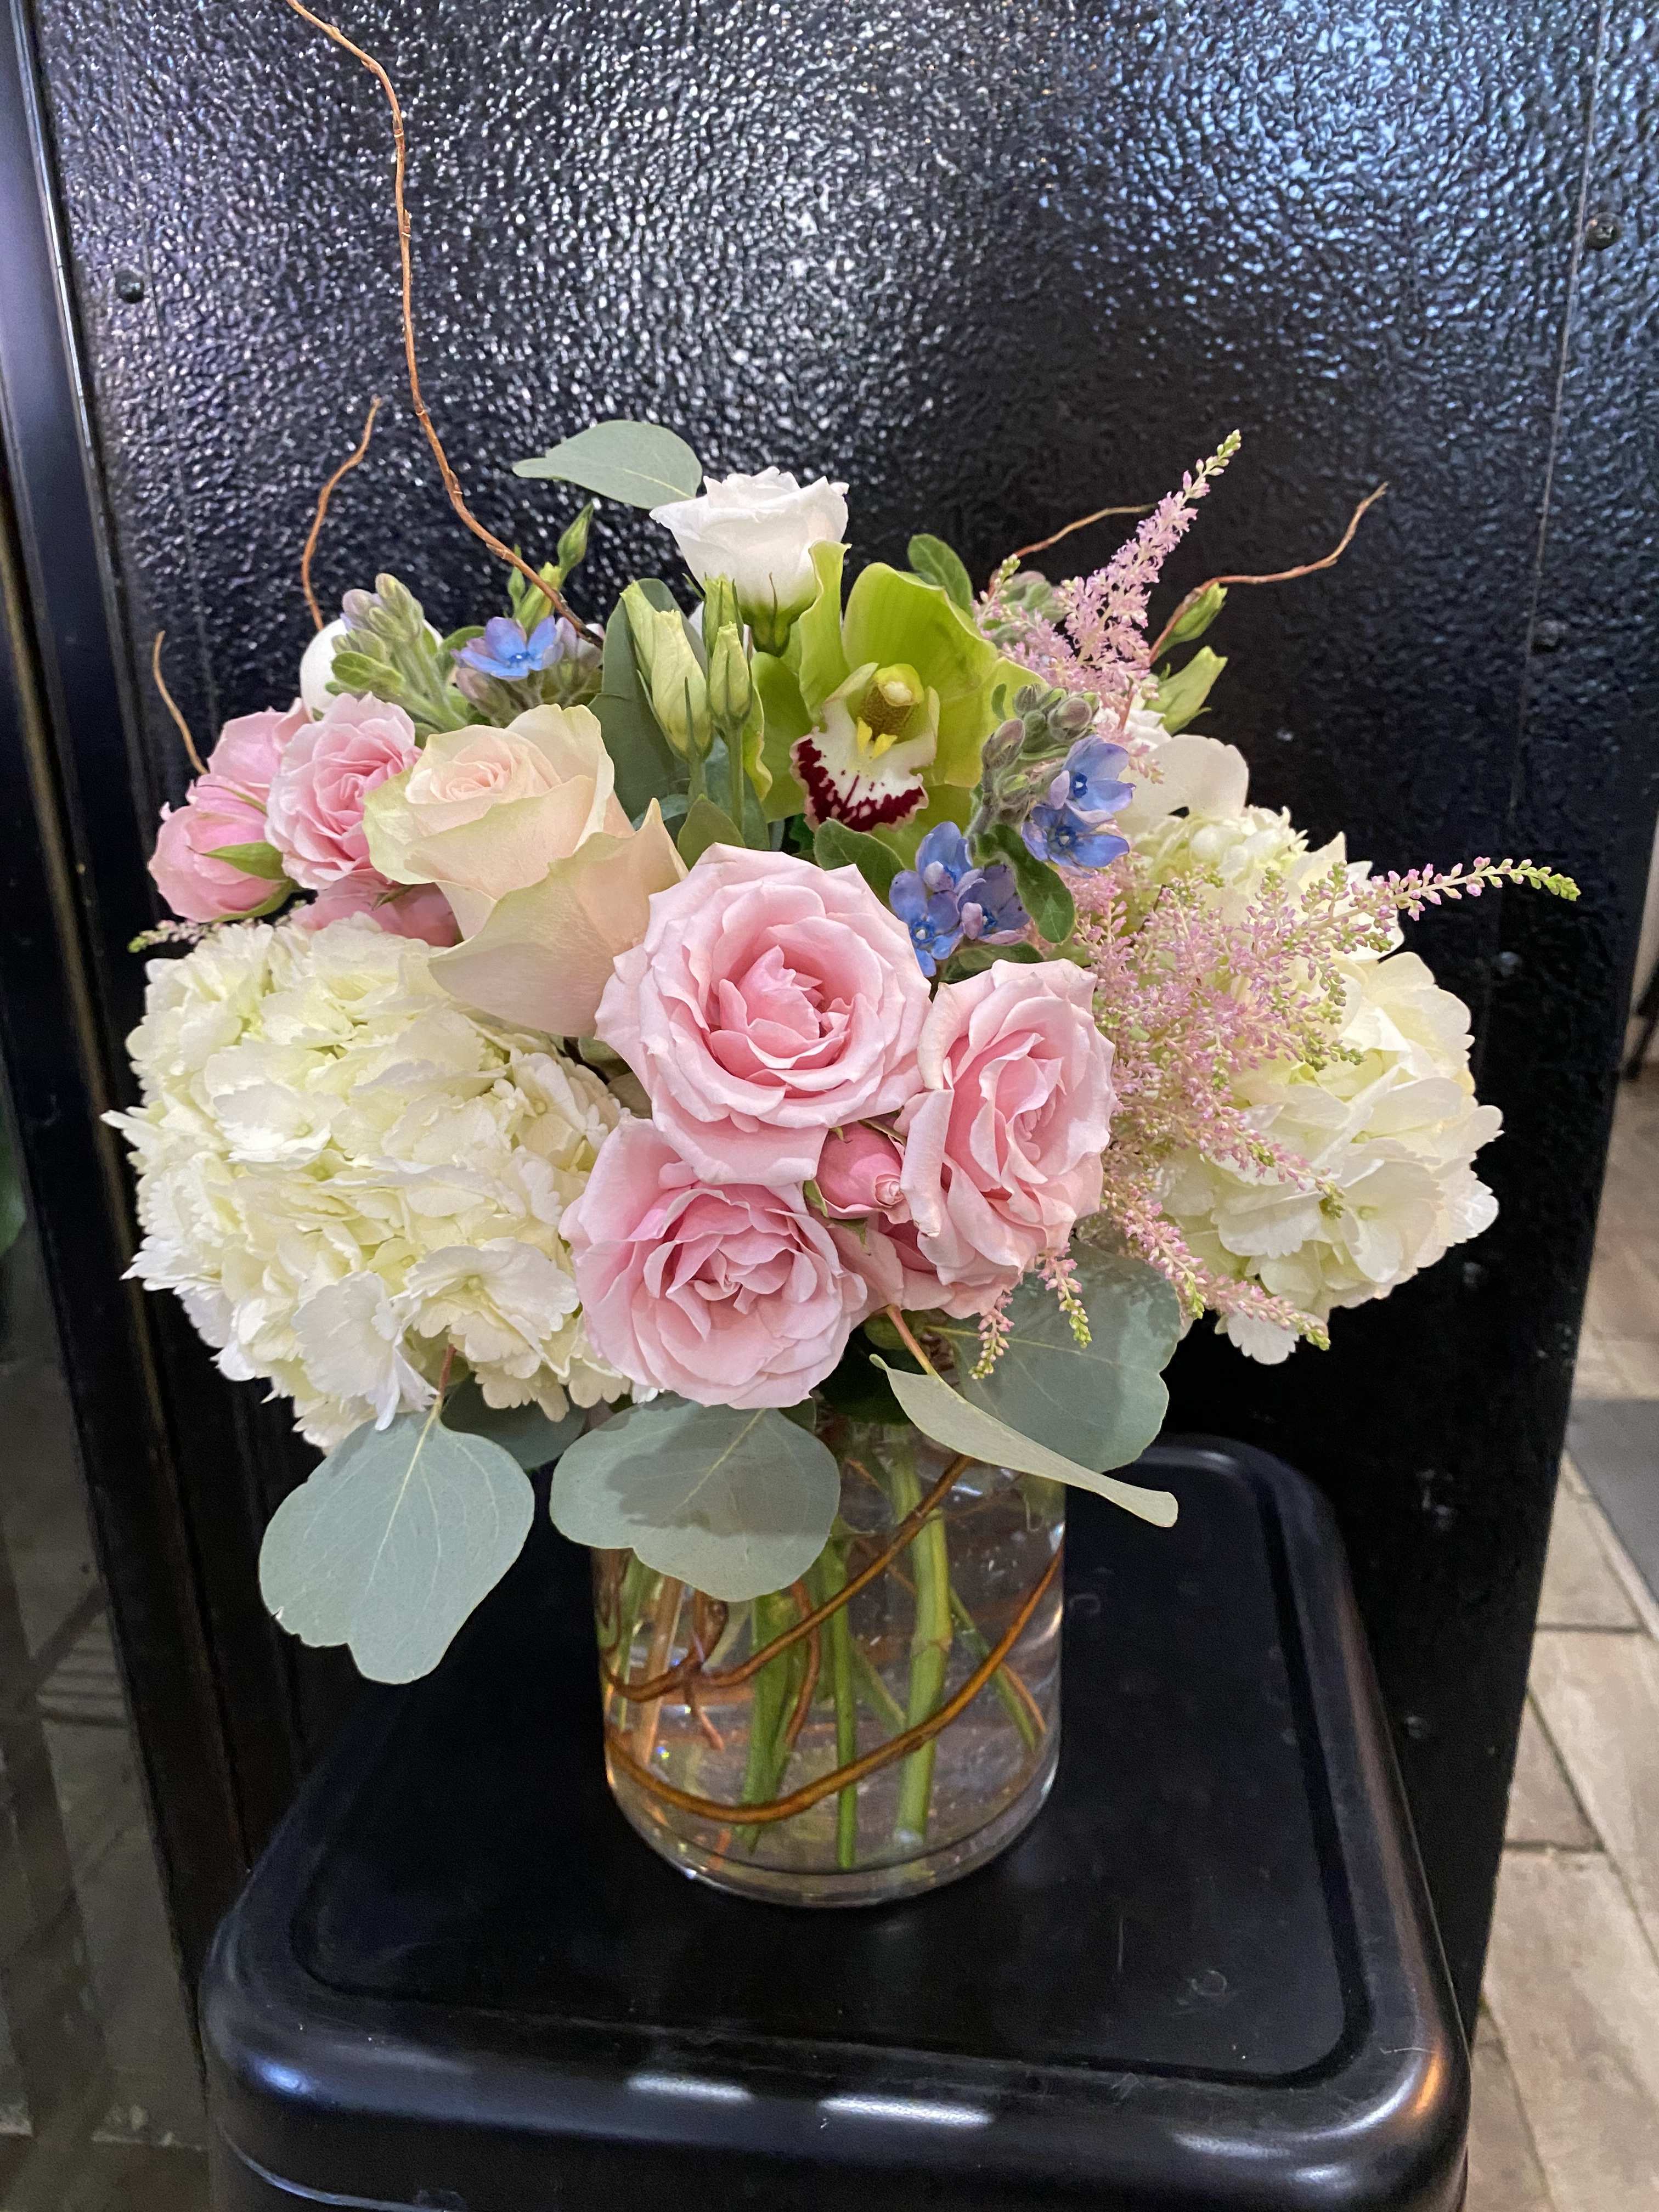 Ballerina  - hydrangeas, roses, spray roses, lisianthus, green cymbidium and curly willow   Delivery minimum is $50.00 Our DELIVERY SERVICE IS TILL 3 PM We cannot guarantee requests for a specific time of delivery. There might be flower substitutions, due to low supply of certain flowers. However, we do our best to provide you with the same look and feel of the arrangement. Our main goal is to always give our customers quality flowers and service. To make sure that you get the exact same flowers, ordering a few days ahead of desired delivery date is key.